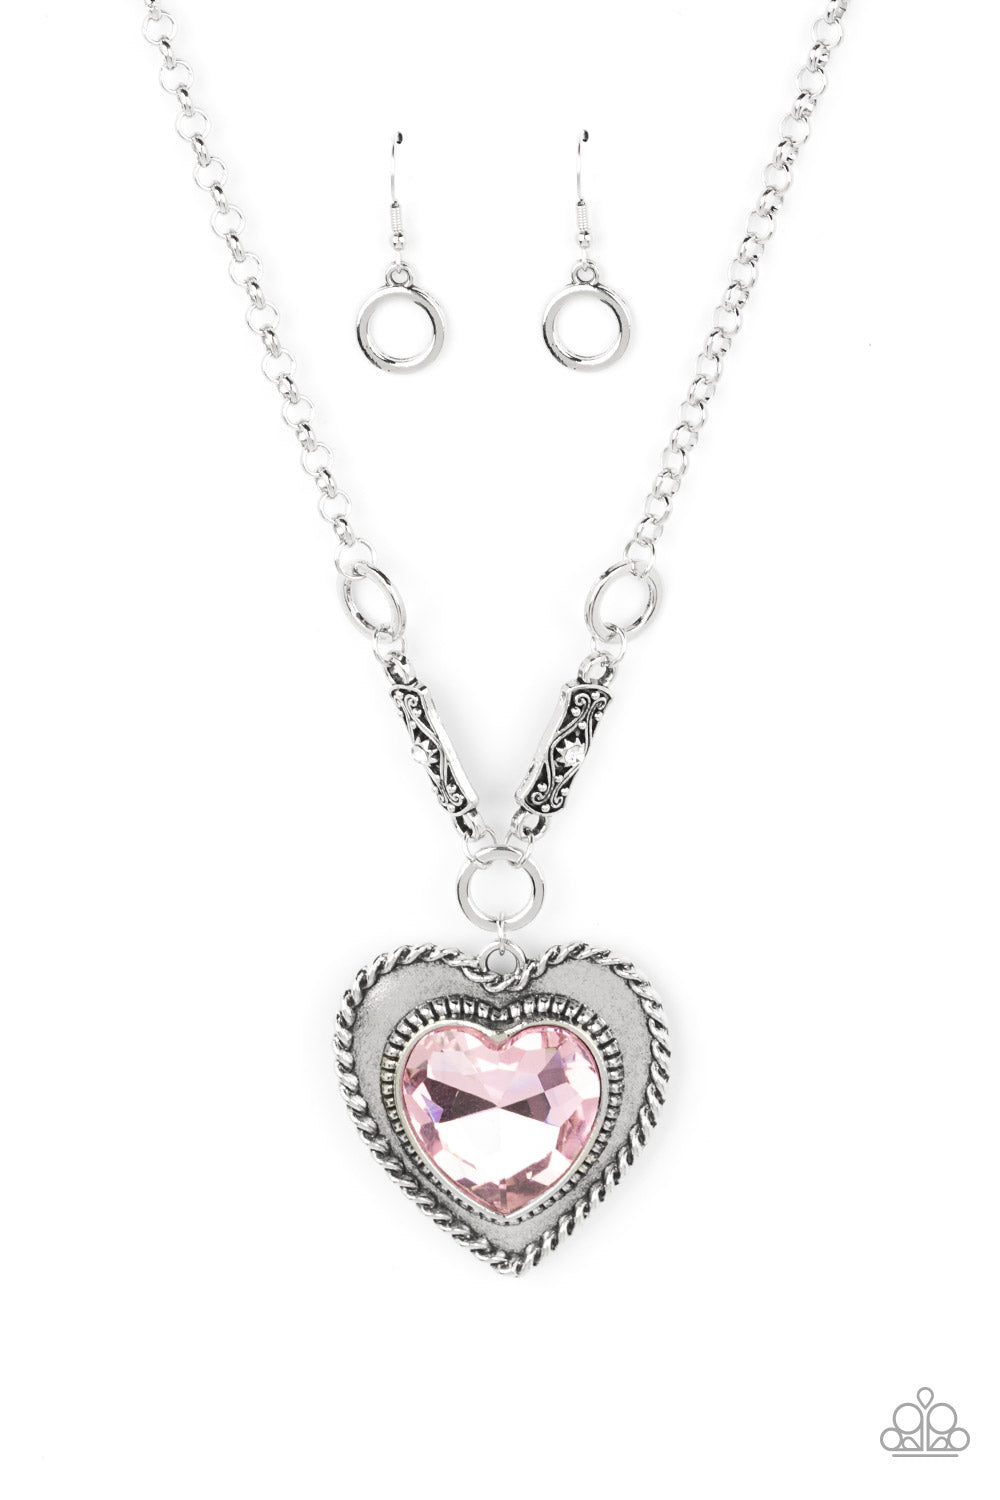 Paparazzi Accessories Heart Full of Fabulous - Pink Heart Necklaces bordered in spun silver ribbons, an oversized Gossamer Pink heart gem is pressed into a silver heart frame below the collar. The flirtatious pendant attaches to silver rings and decorative silver frames dotted in white rhinestones, resulting in a dash of vintage inspired romance. Features an adjustable clasp closure.  Sold as one individual necklace. Includes one pair of matching earrings.